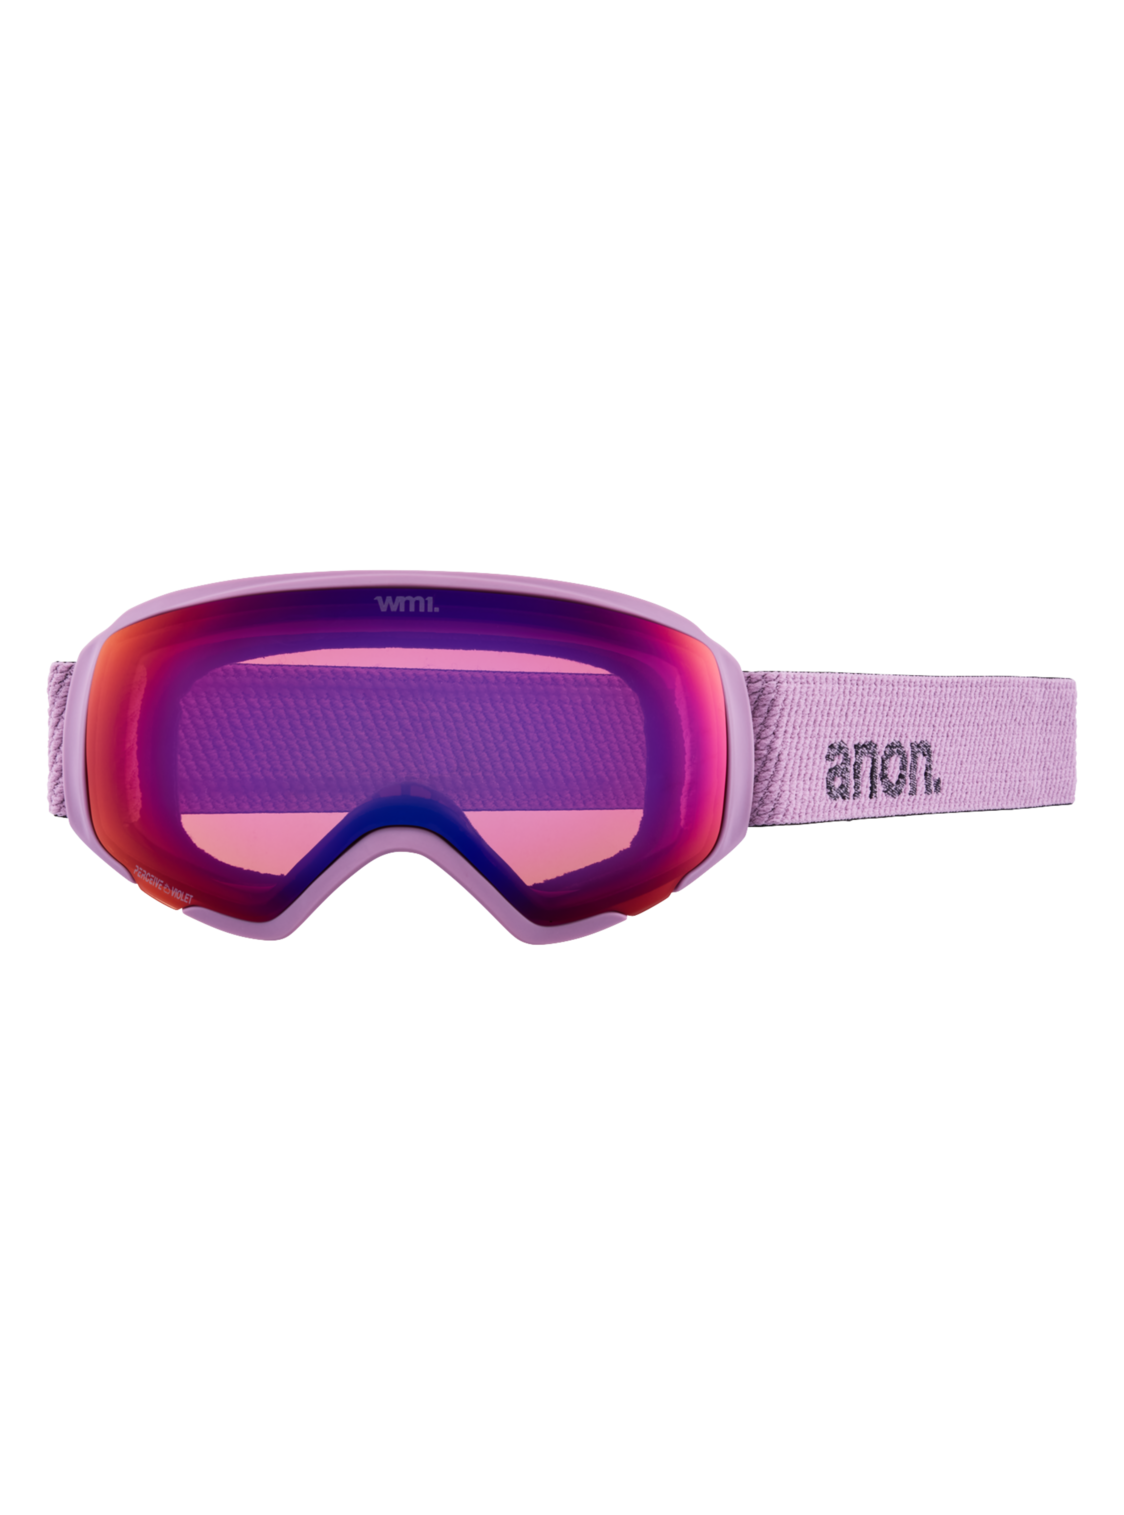 Anon WM1 goggle purple / perceive variable violet (including extra lens and MFI mask)